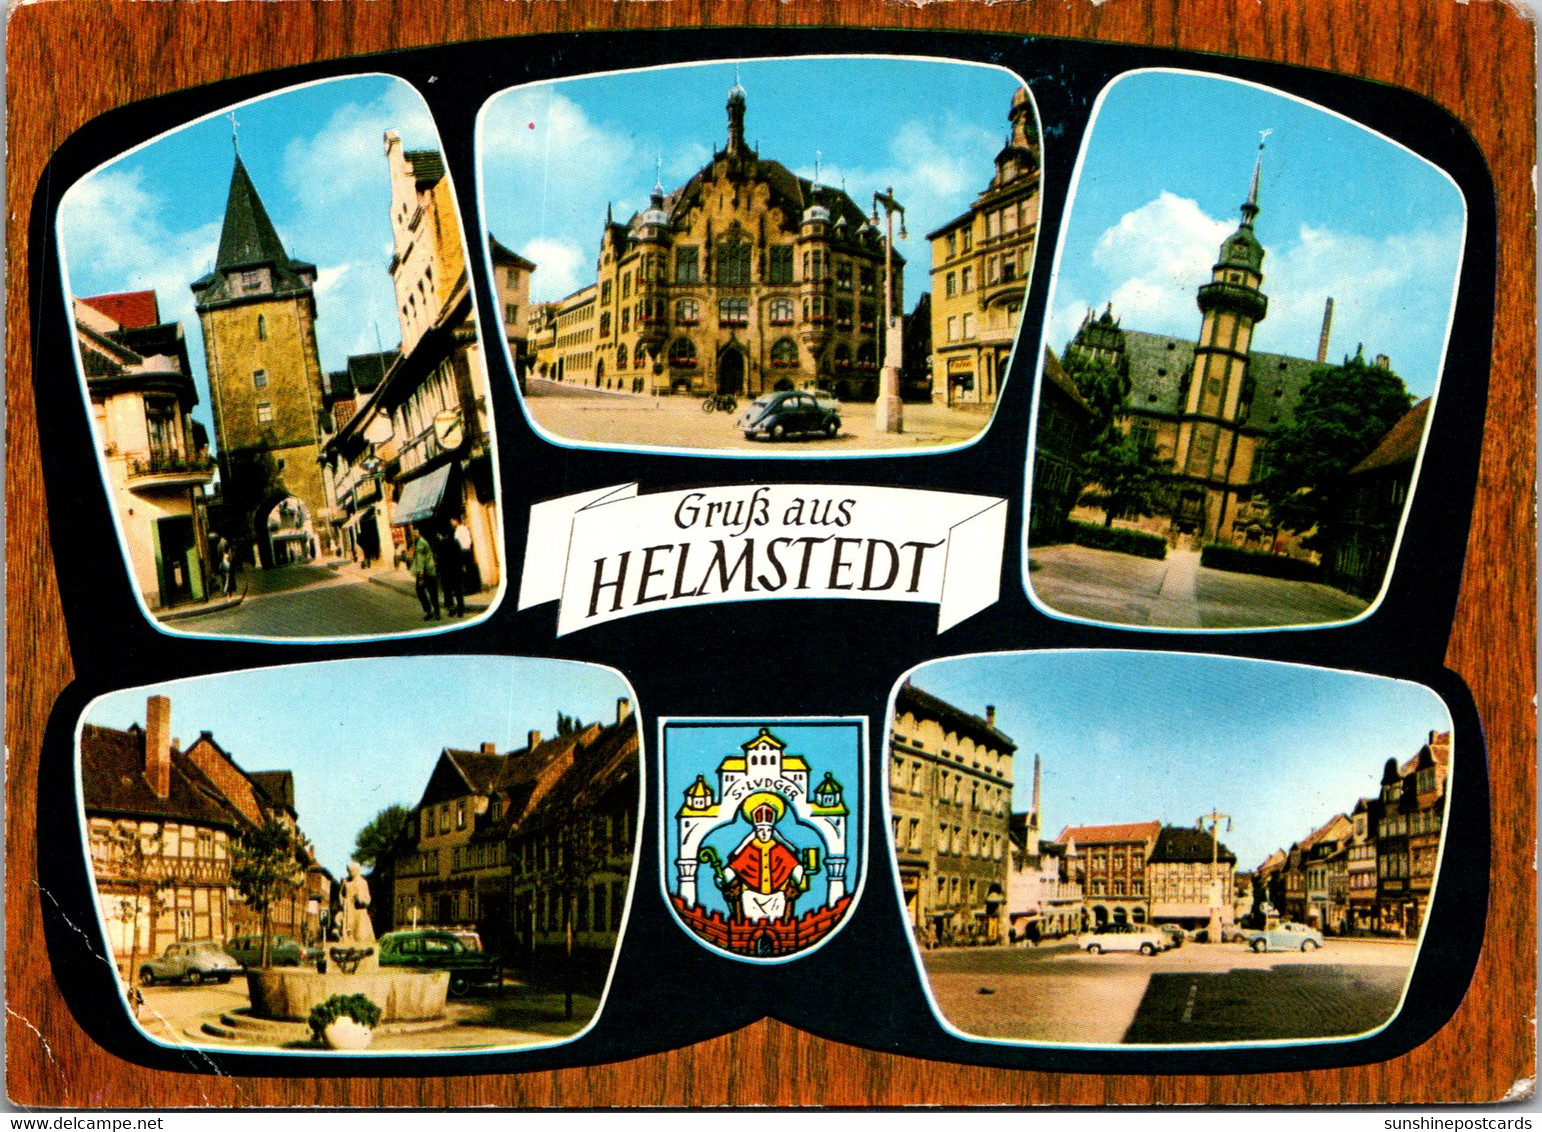 Germany Helmstedt Gruss Aus With Multi Views - Helmstedt